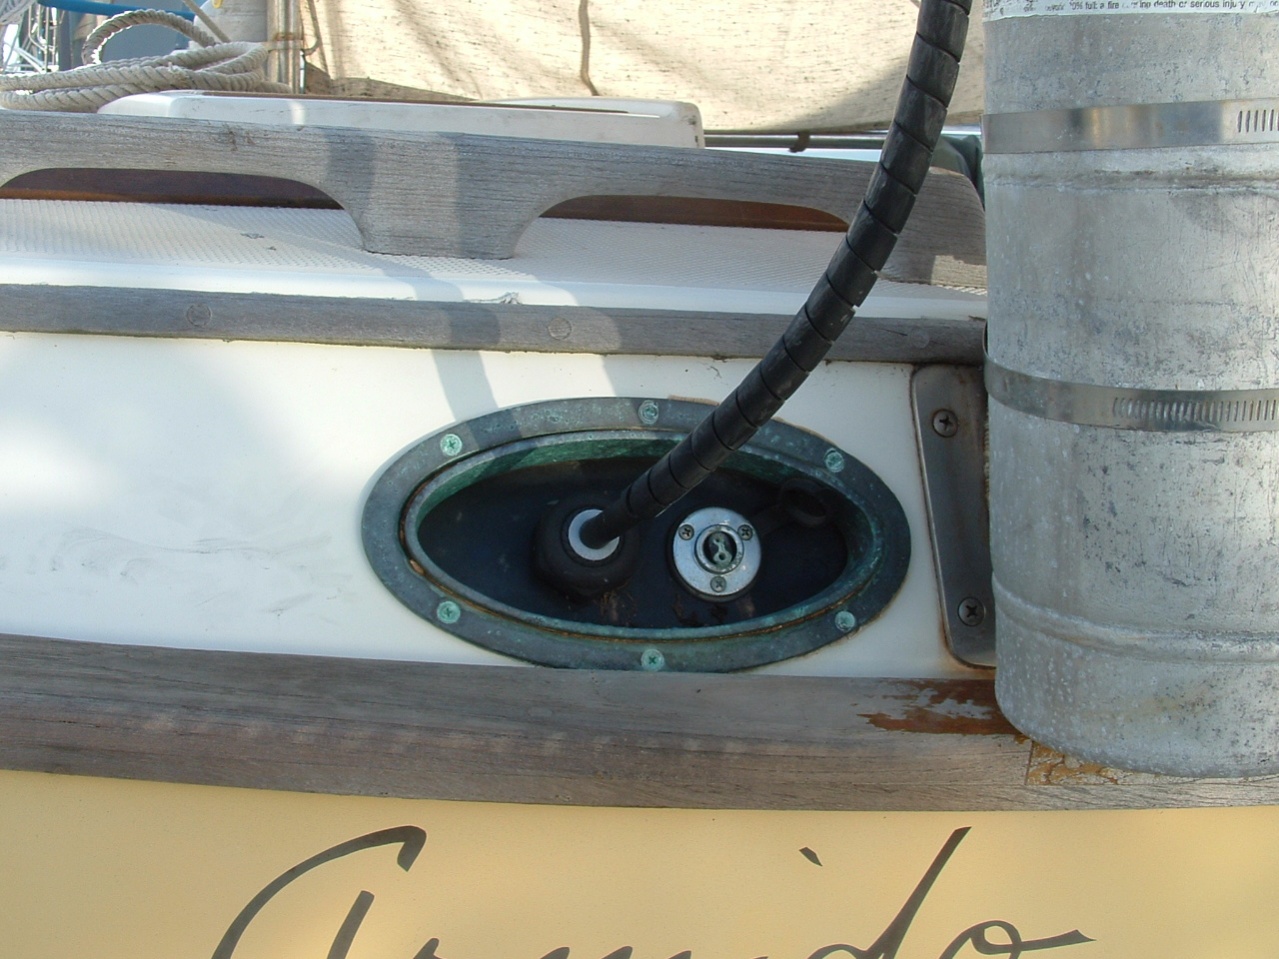 Cable Through-Deck - Cruisers & Sailing Forums